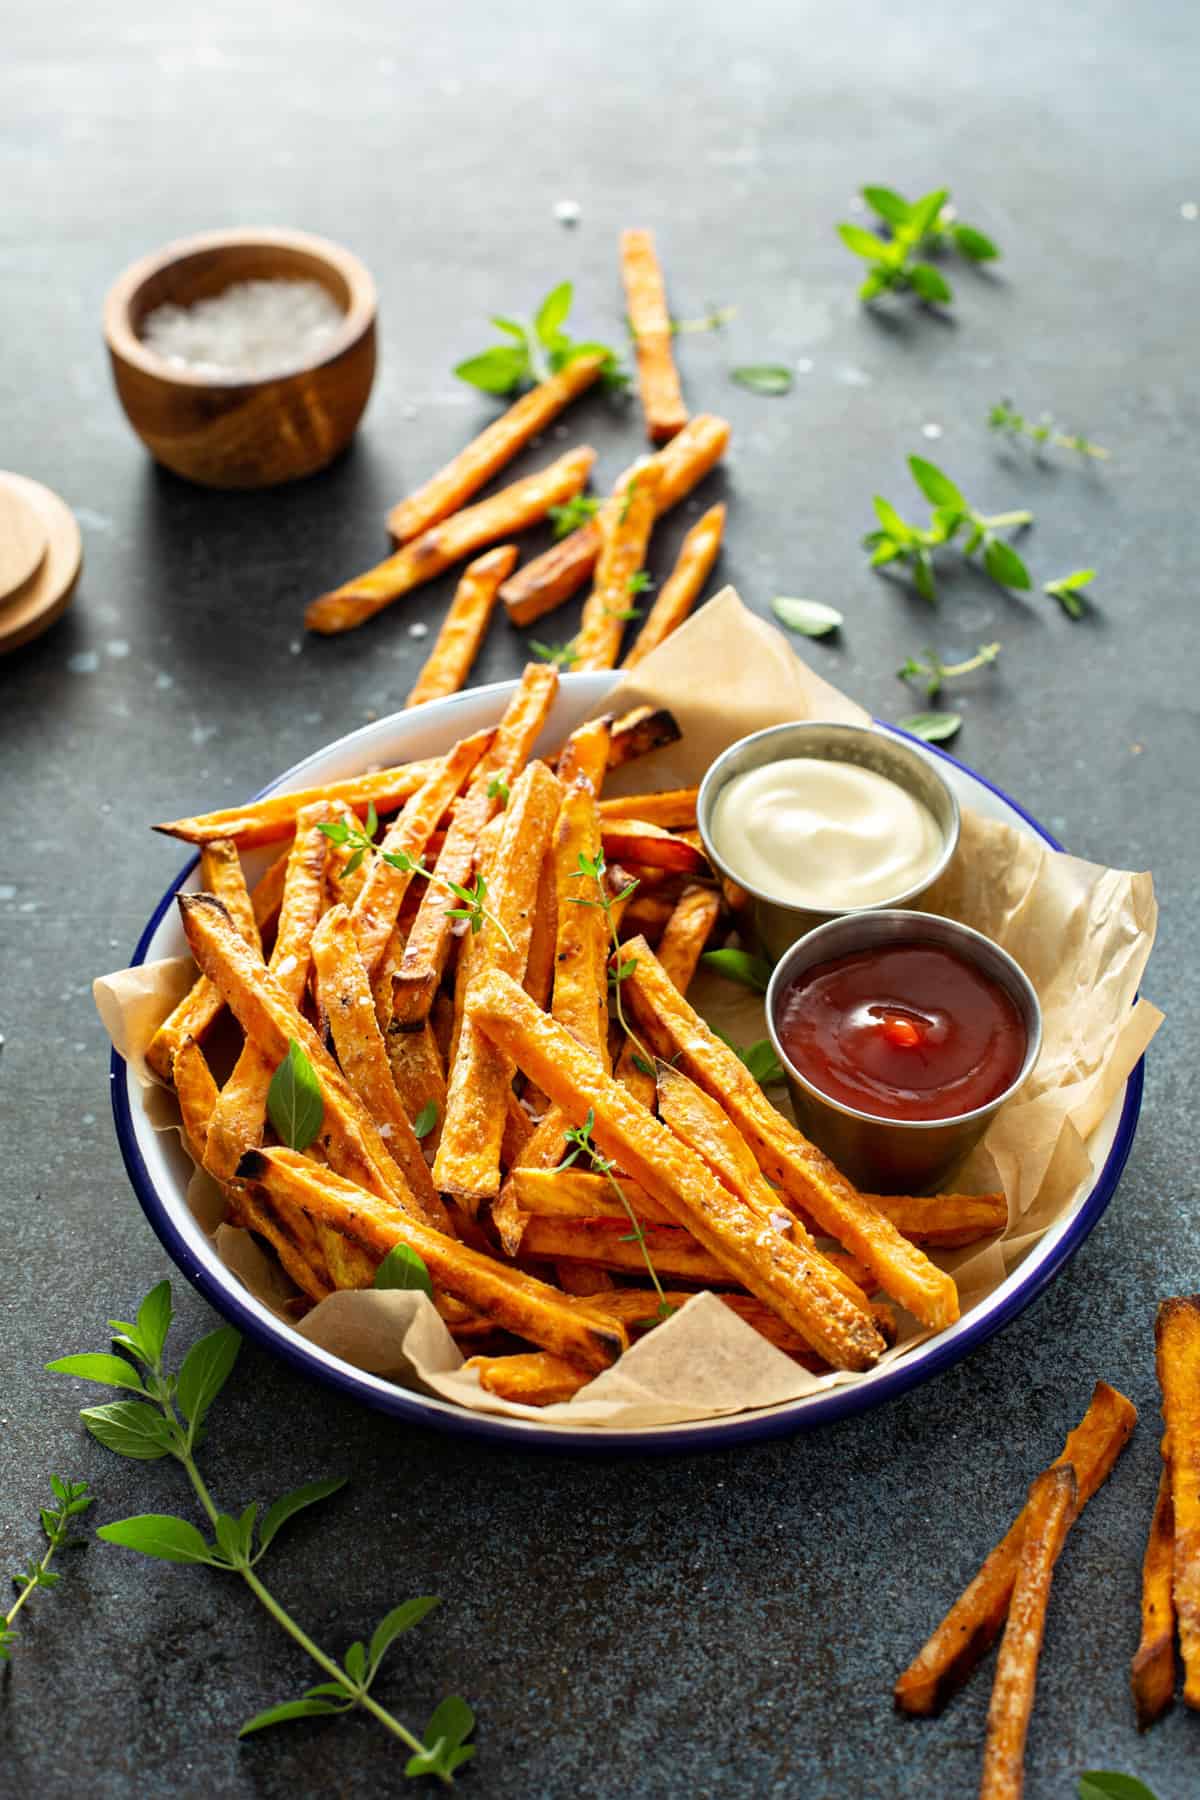 A serving bowl lined with parchment paper, filled with crispy air fryer sweet potato fries, sea salt and fresh herbs, served with ketchup and aioli.